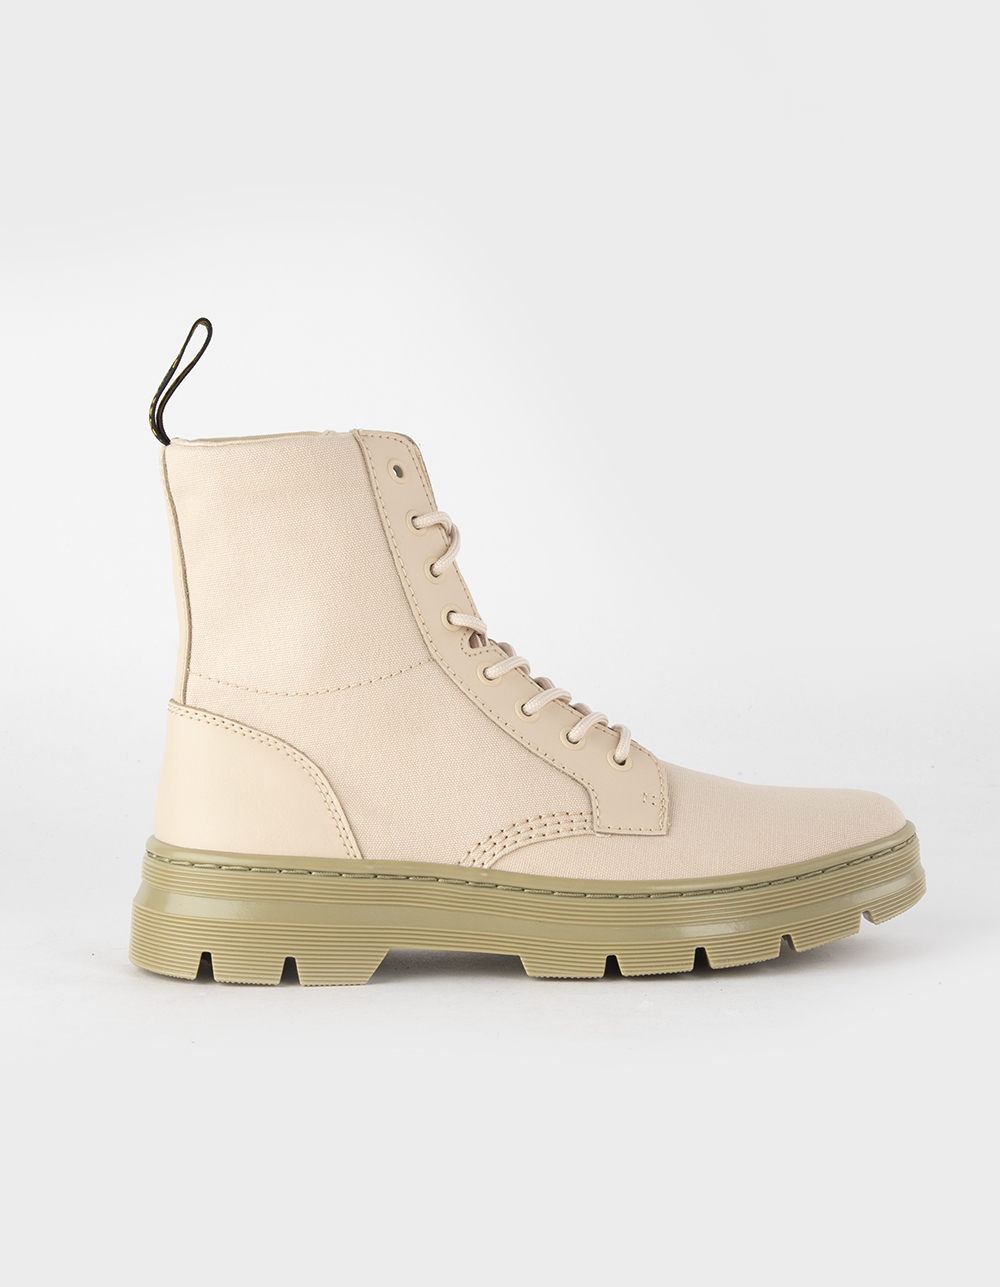 Bourgeon Shinkan Collega DR. MARTENS Combs Mens Boots - OFF WHITE | Tillys